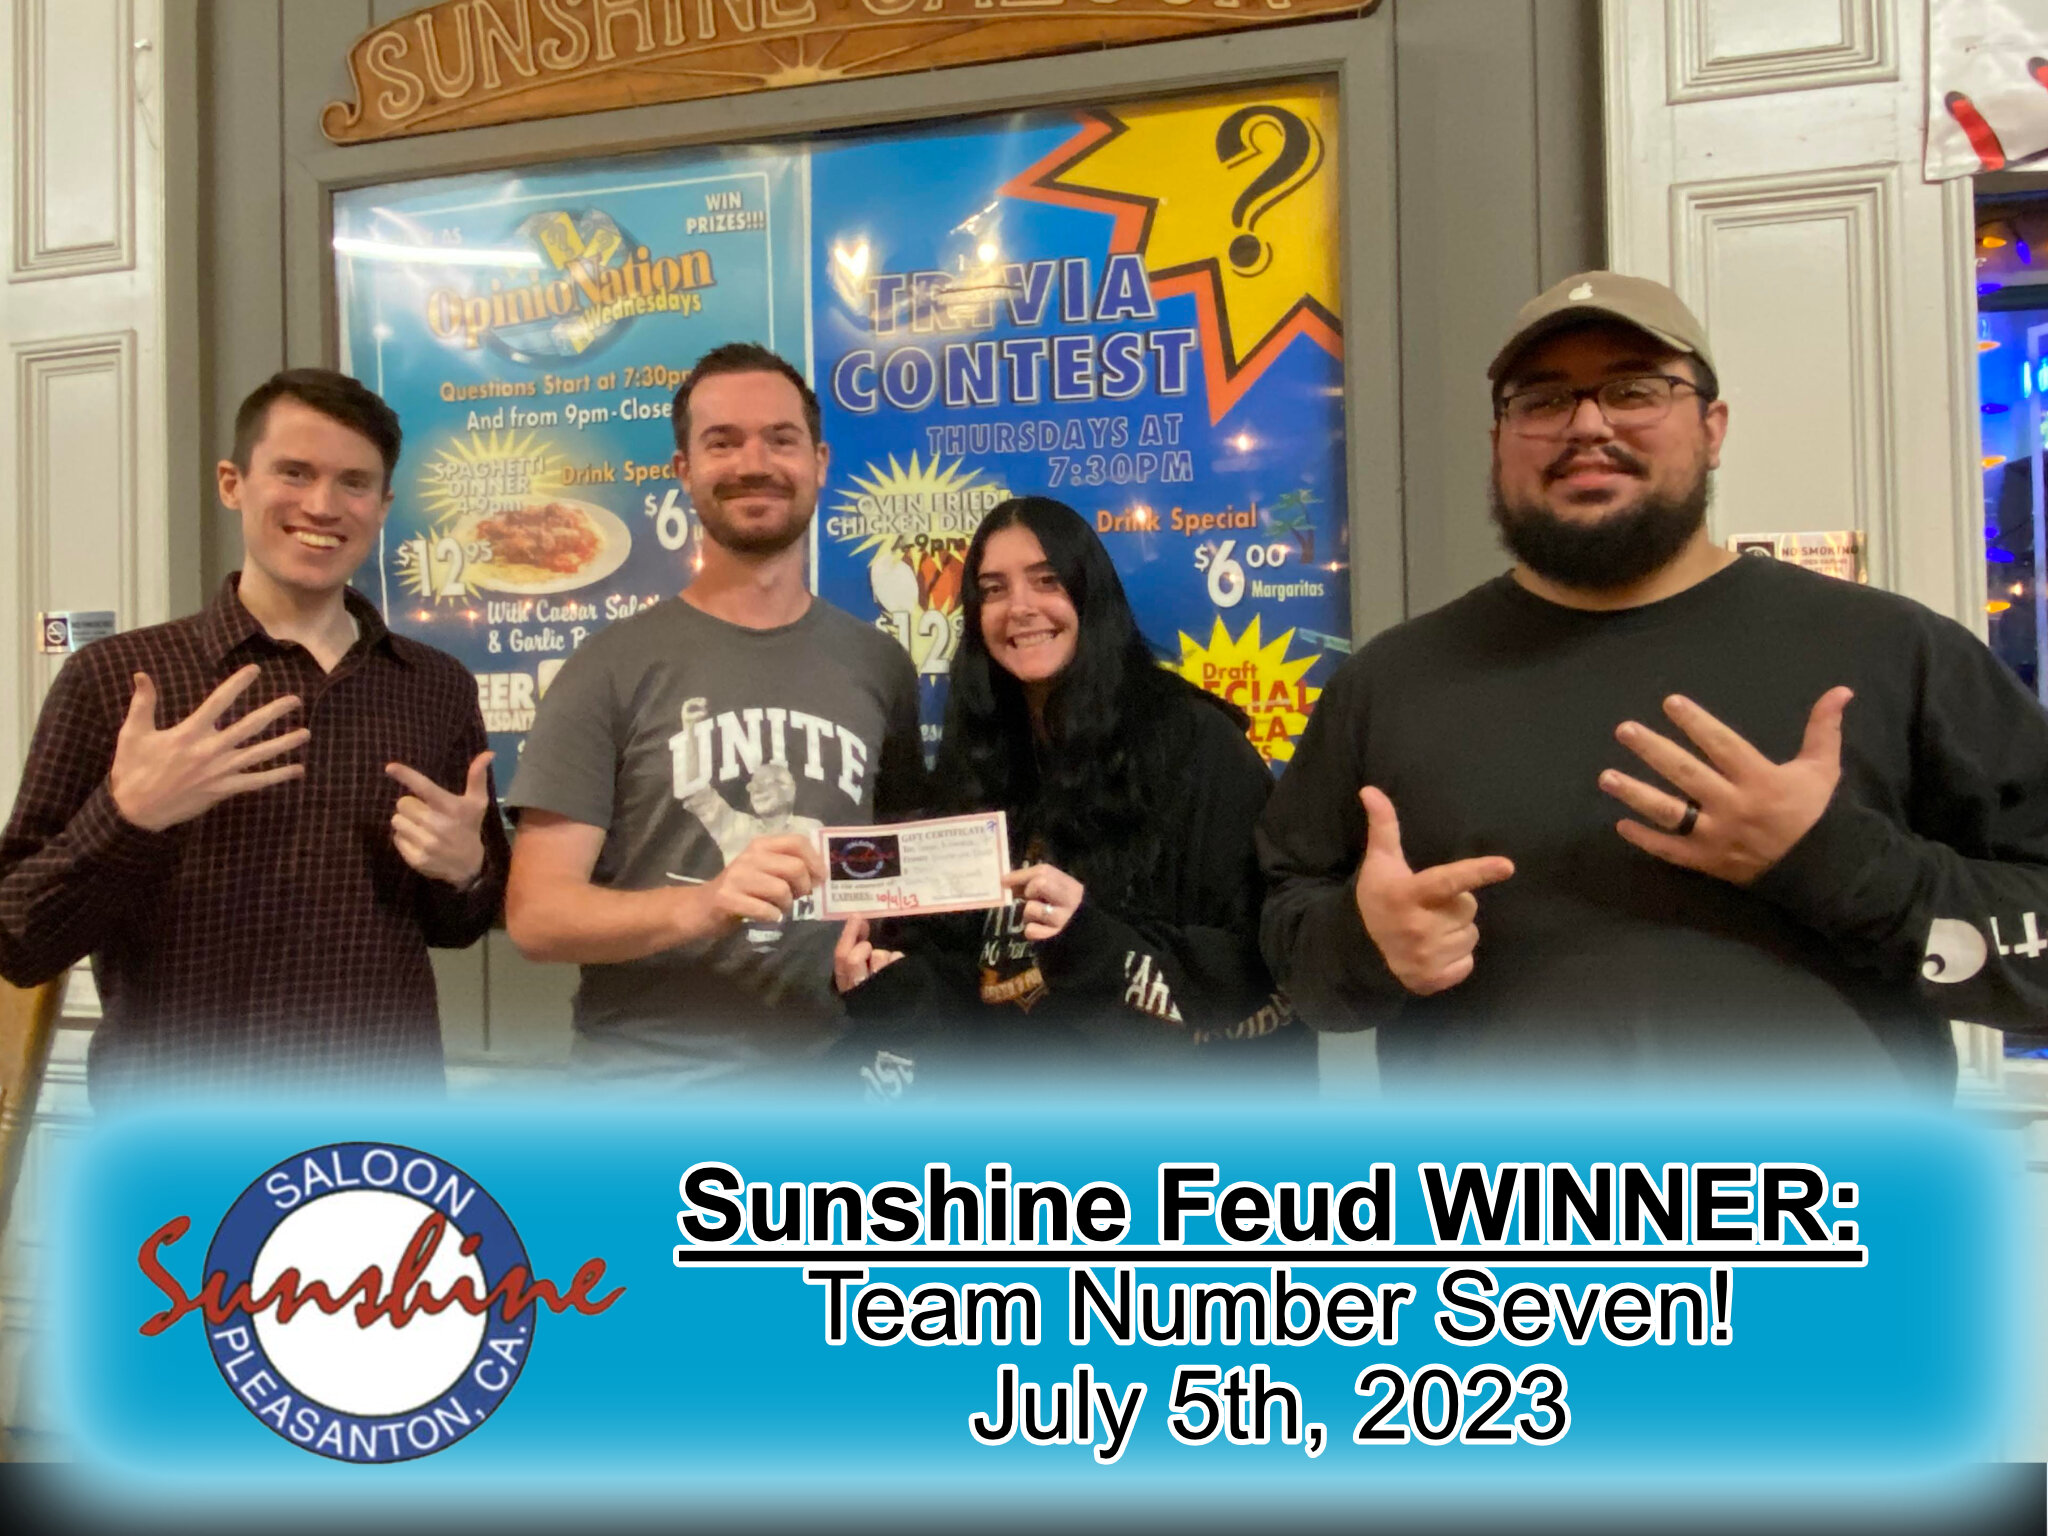 Congratulations to our Sunshine Feud trivia winners last Wednesday: Team Number Seven! 
Come out TONIGHT! for your chance to win our family feud style trivia night here at #Sunshinesaloon!